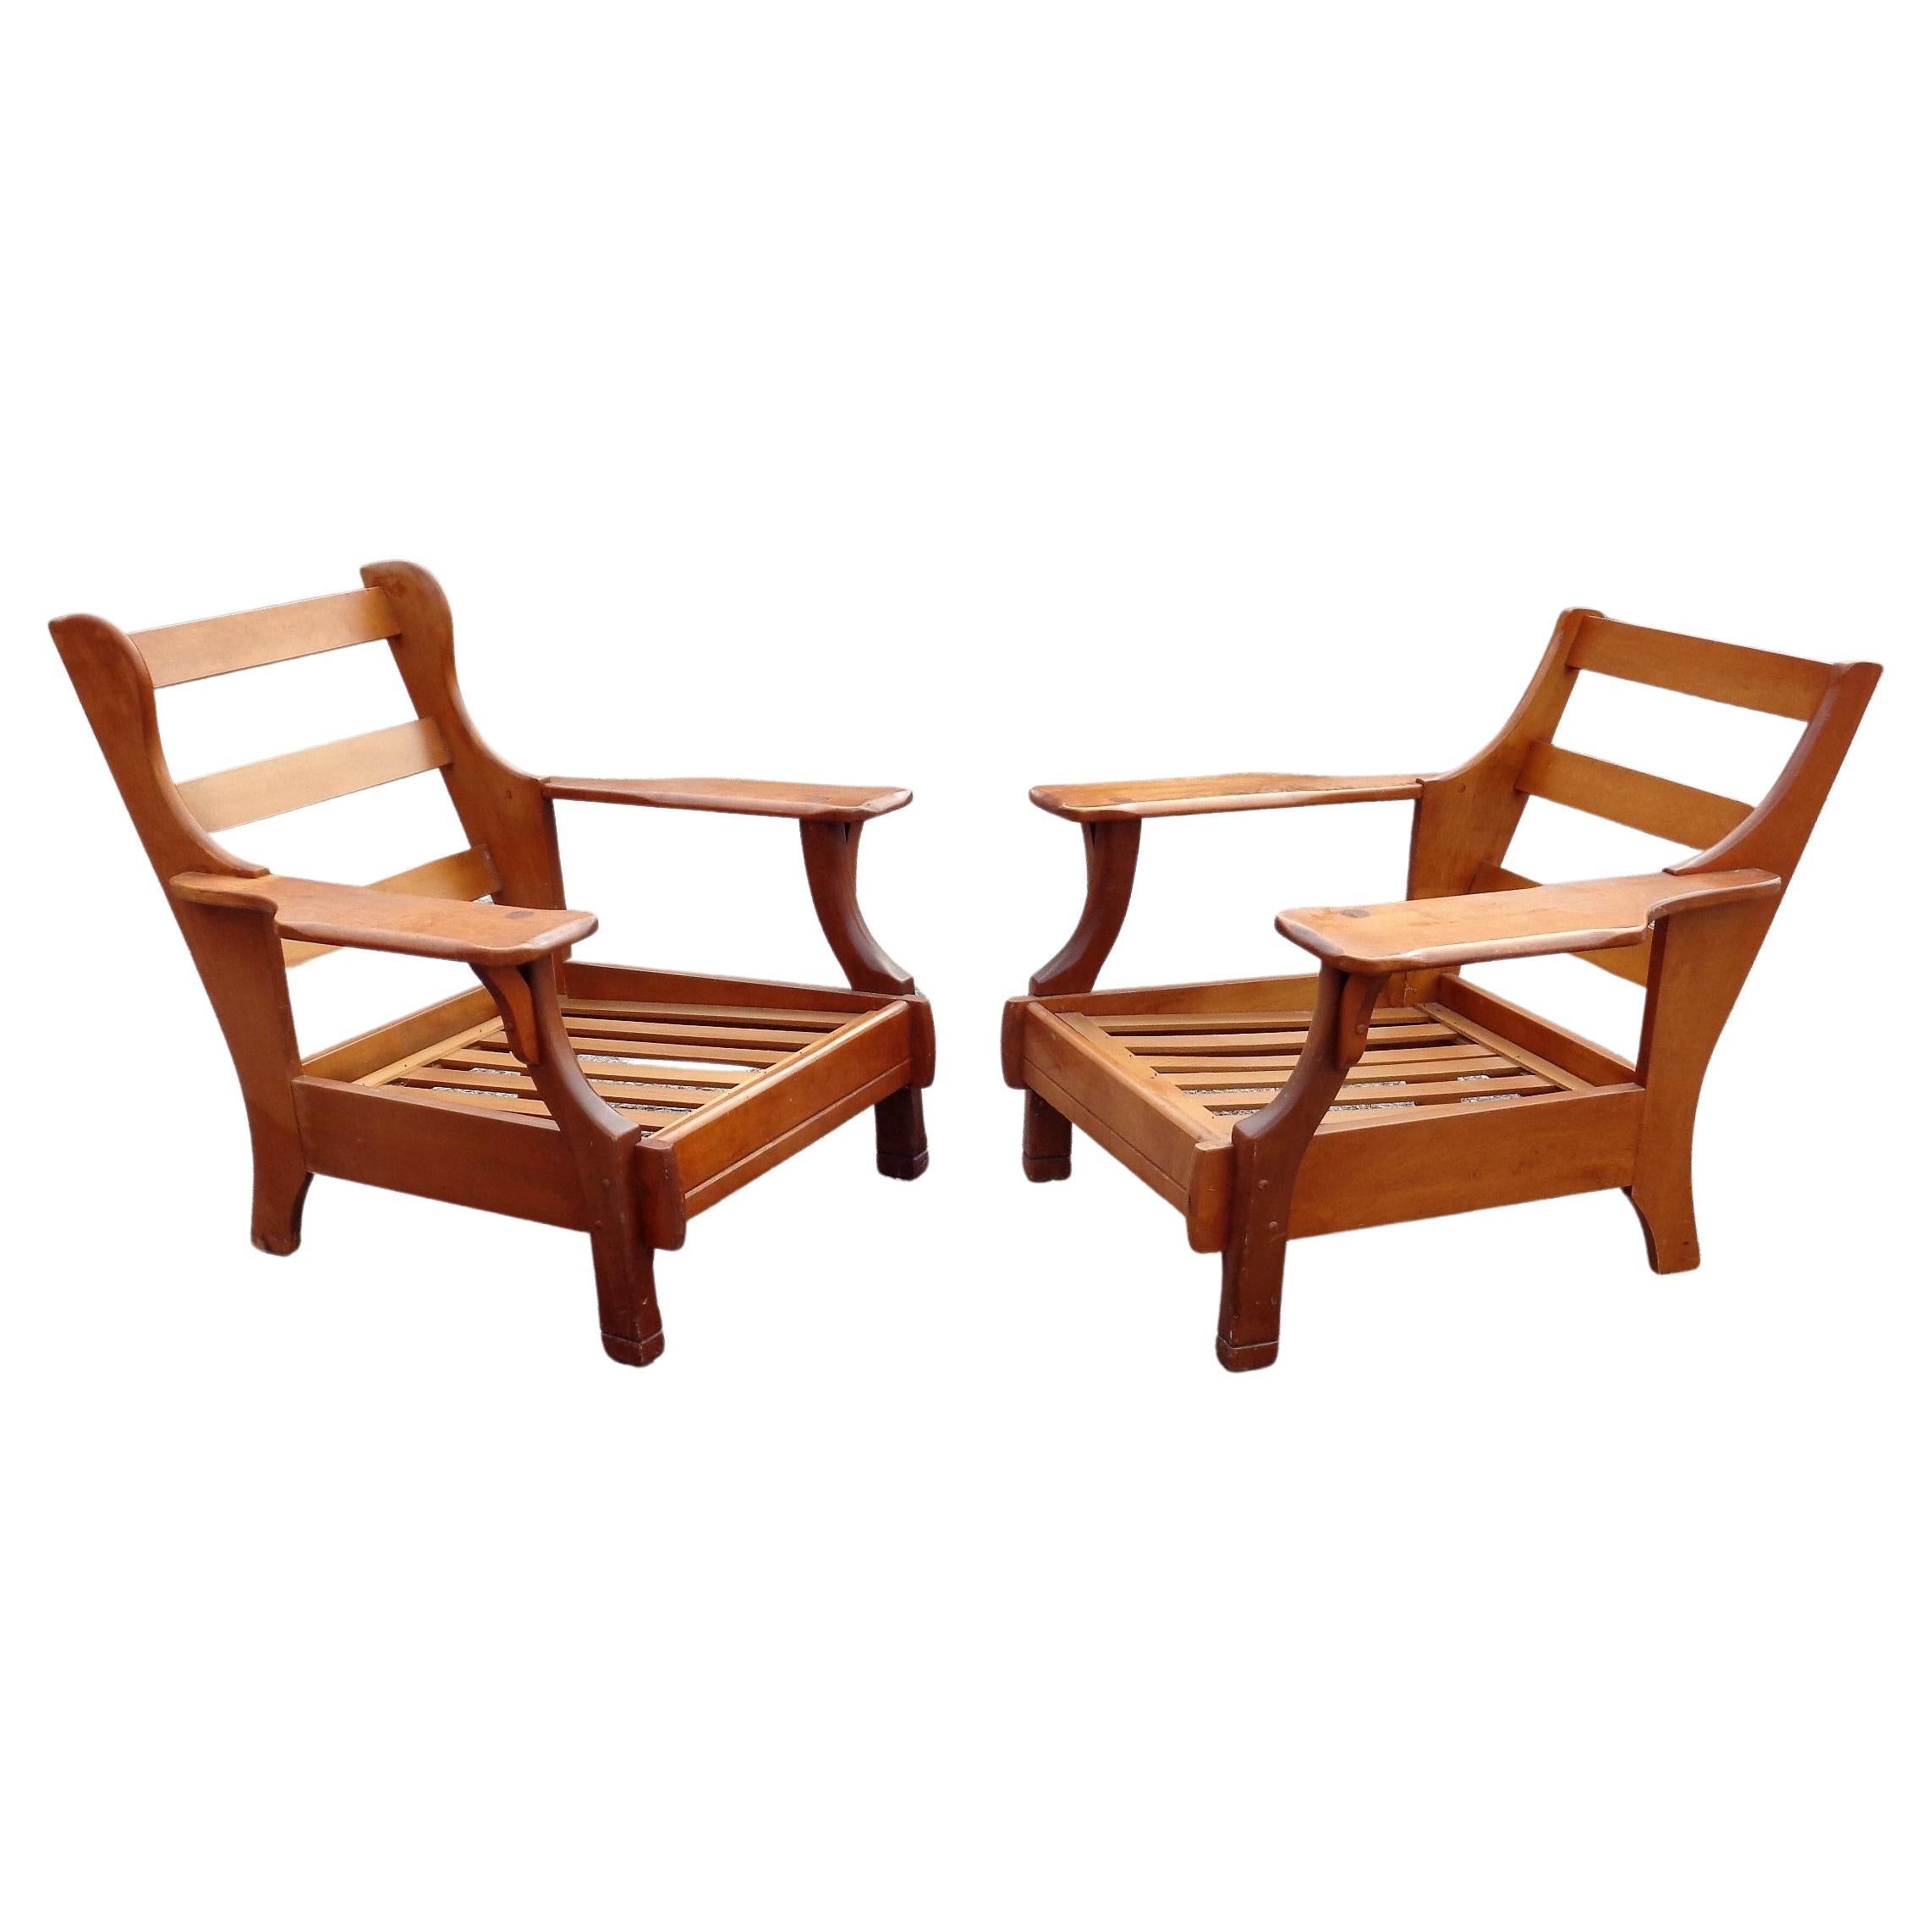 American Rustic Paddle Arm Lounge Chairs, circa 1940